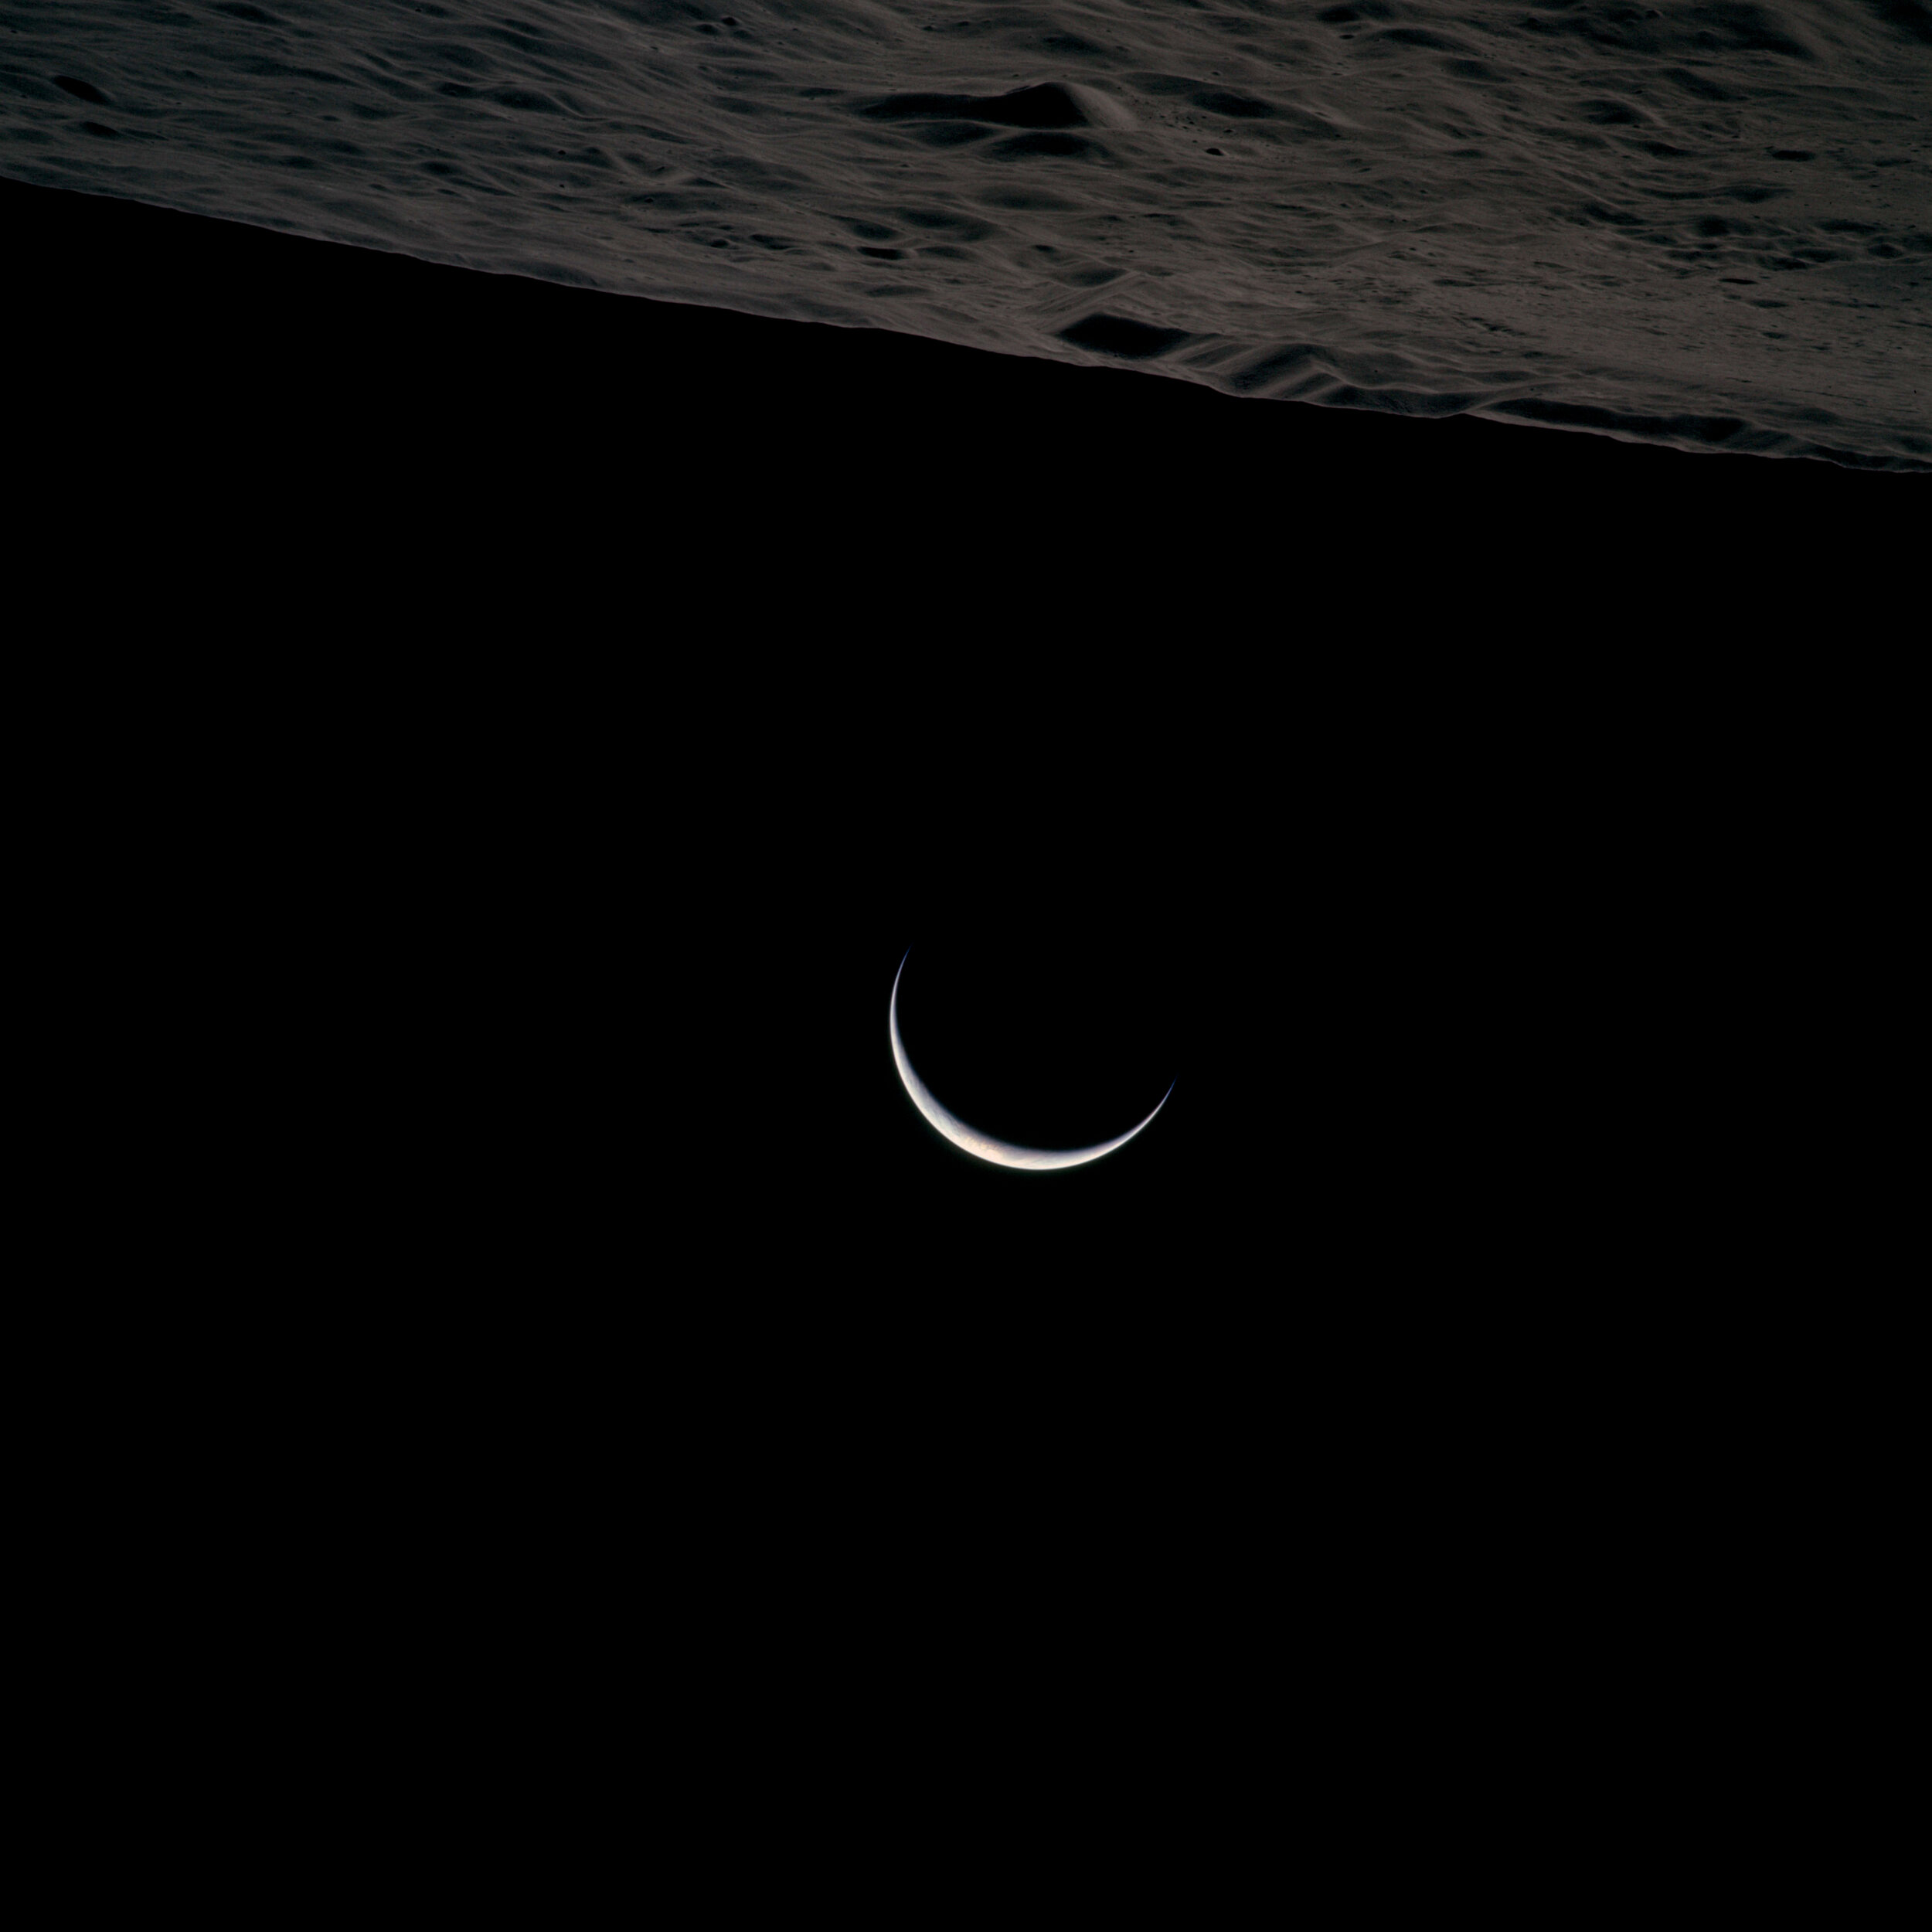  Apollo 15  Earthrise from Apollo 15. It is not immediately obvious, but this photograph is in colour. It was taken in this unusual orientation, with the lunar surface at the top and a thin crescent Earth hanging below. North is to the upper left.  A